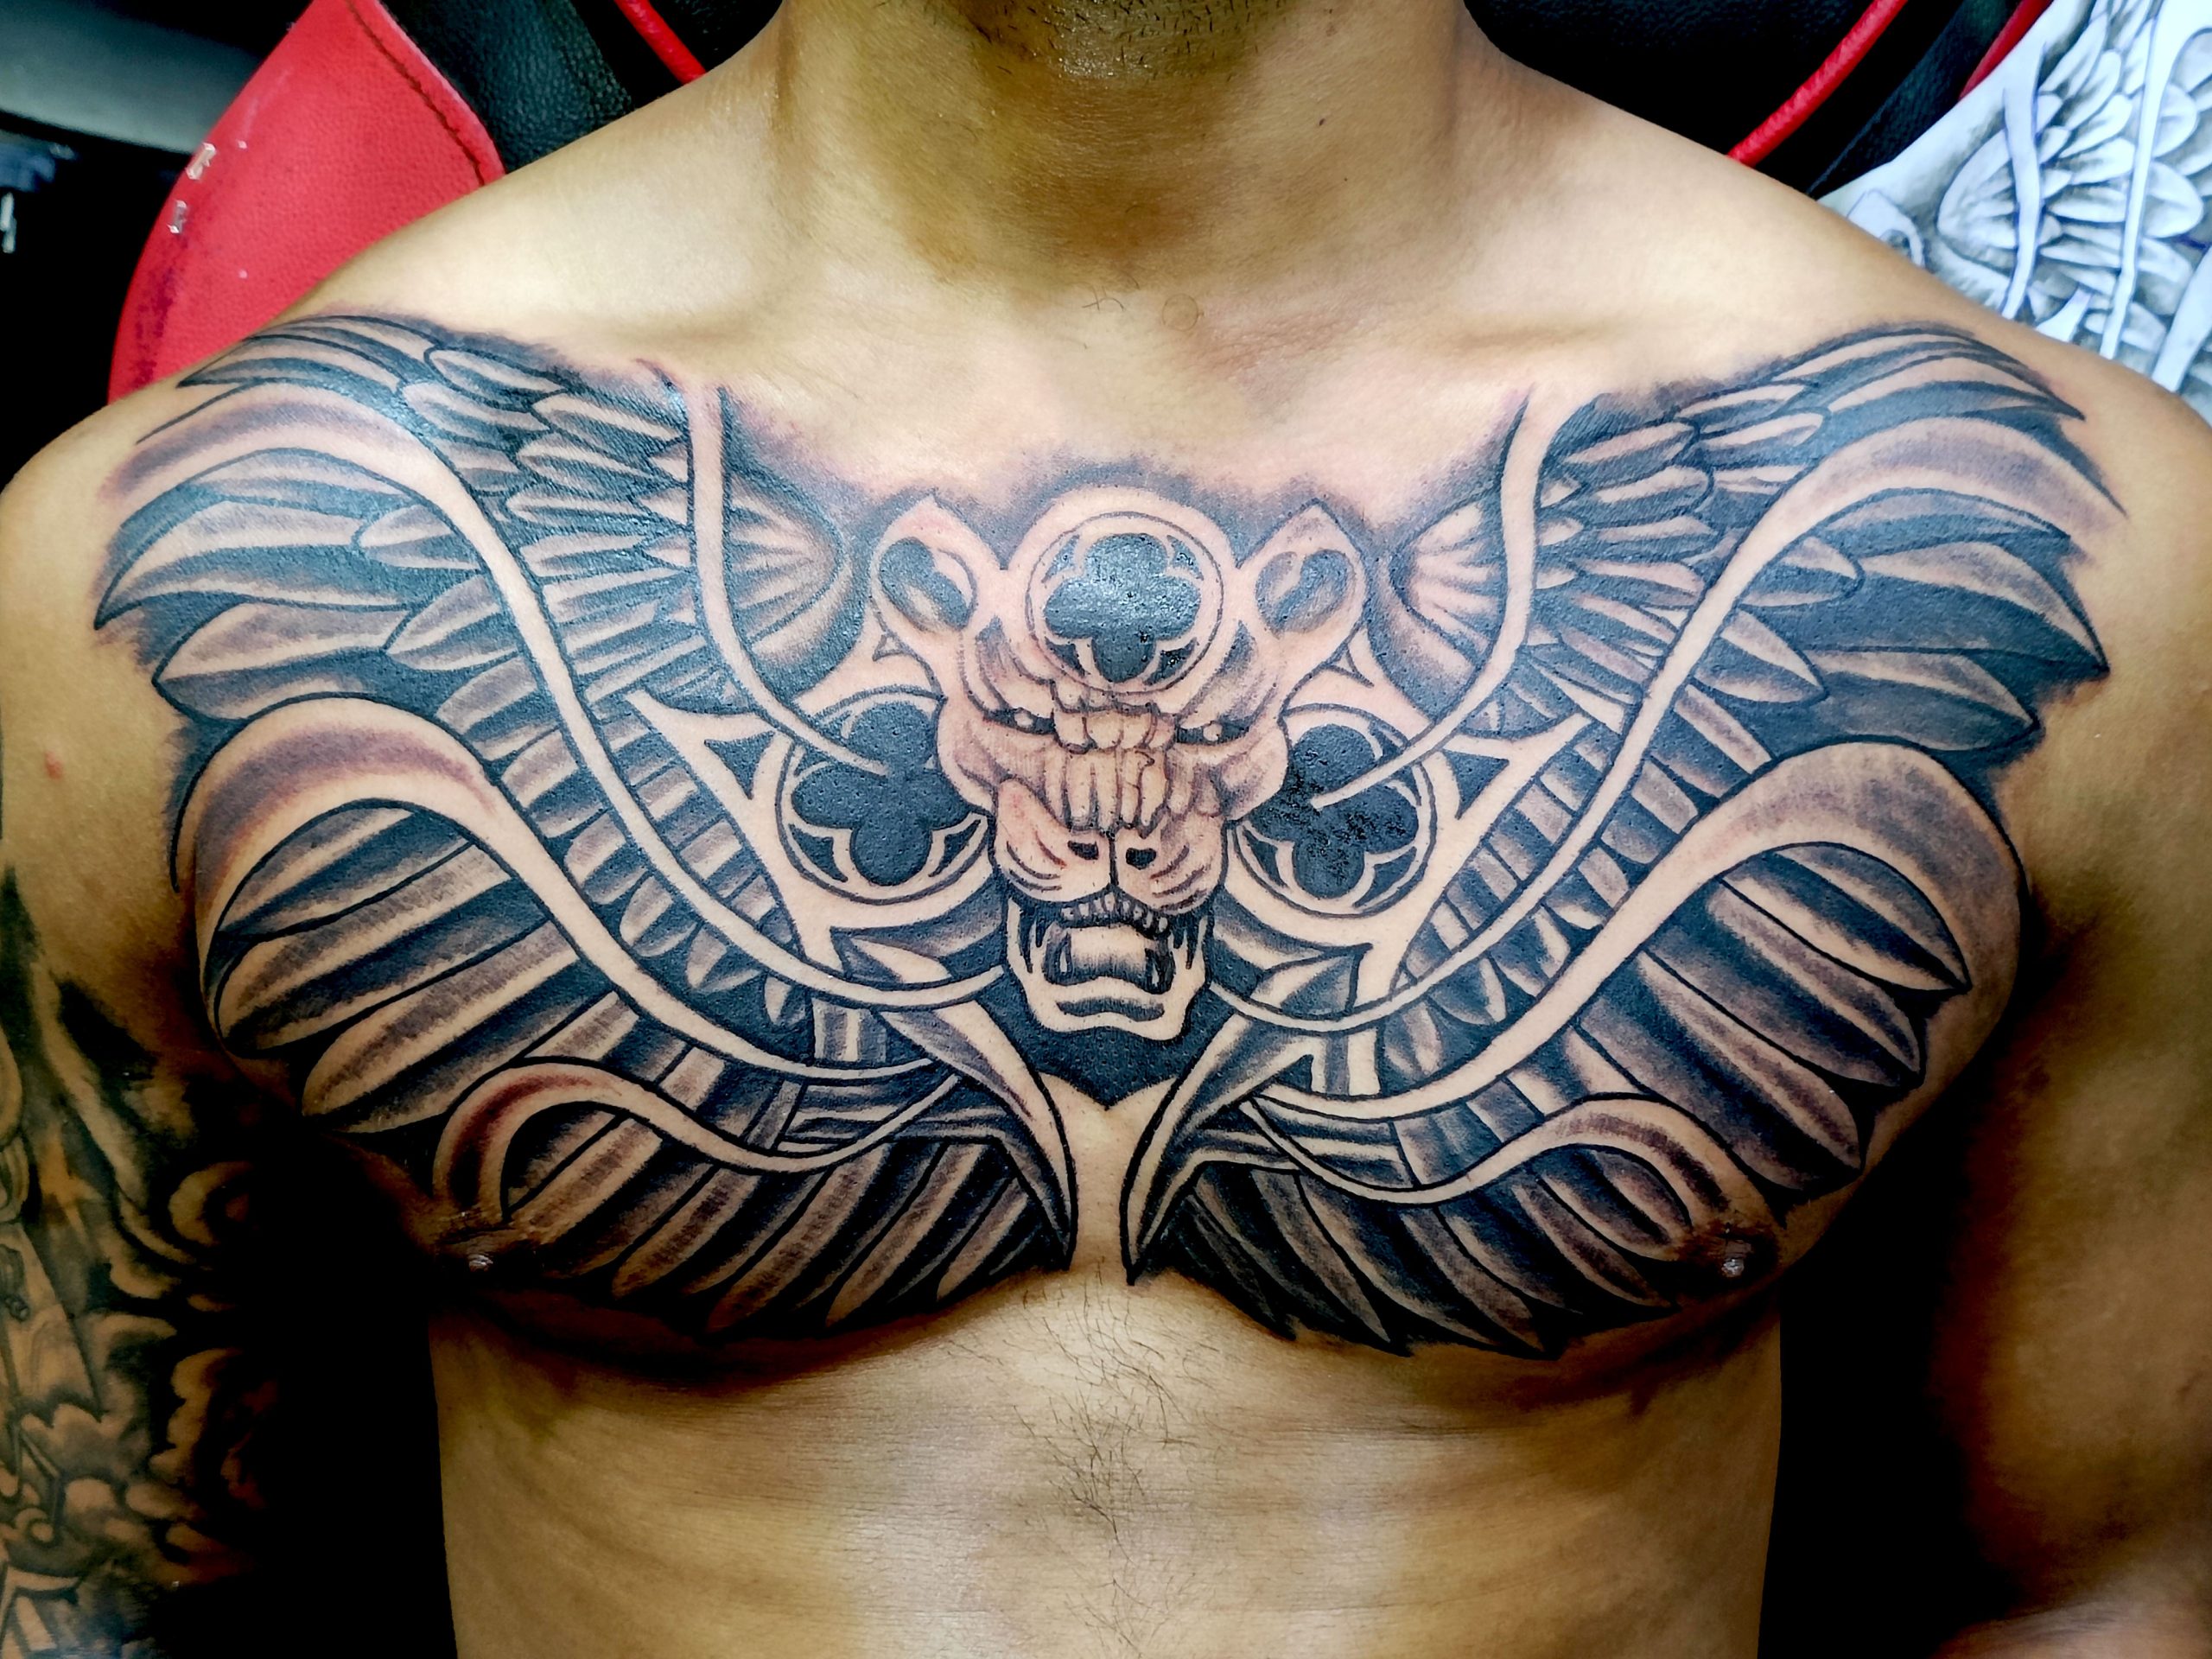 Intricate japanese chest tattoo design with kanjis on Craiyon